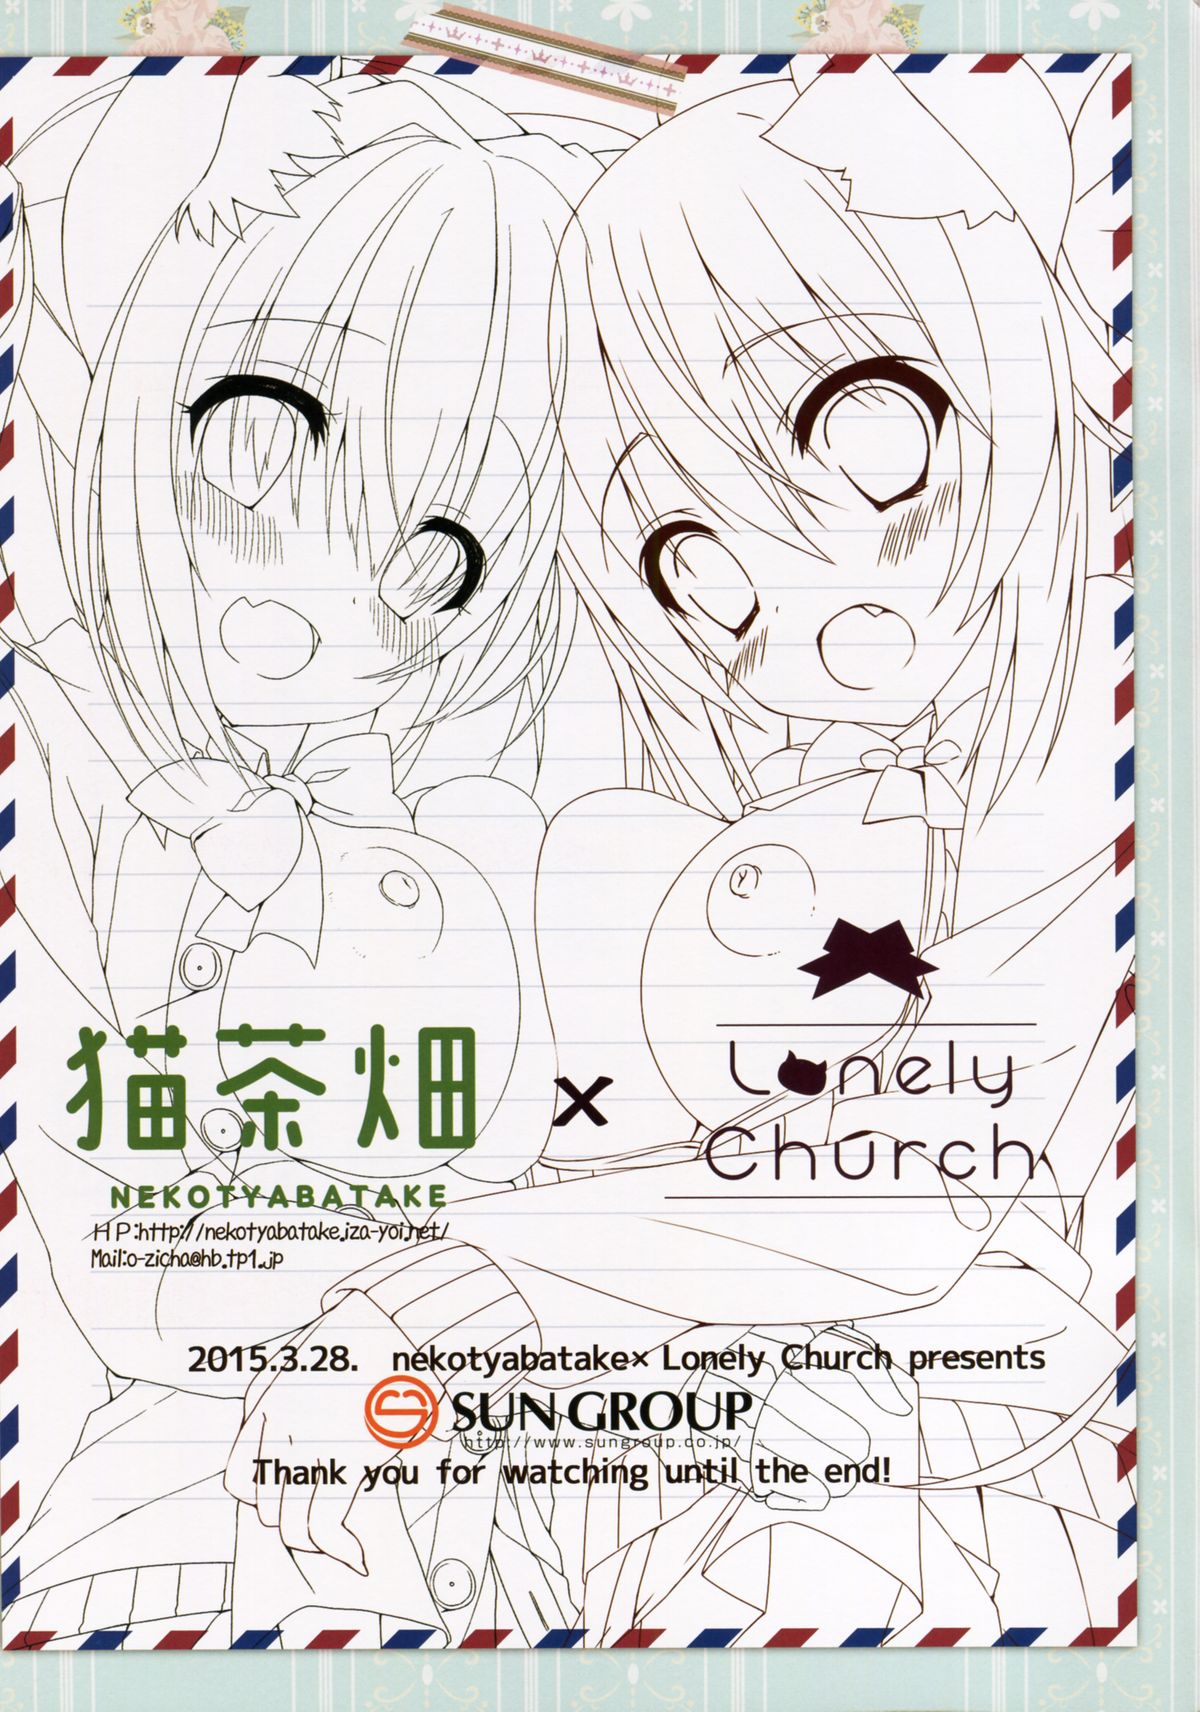 (CSP6) [猫茶畑, Lonely Church (おーじ茶, 鈴音れな)] Poster Girl Collection 2